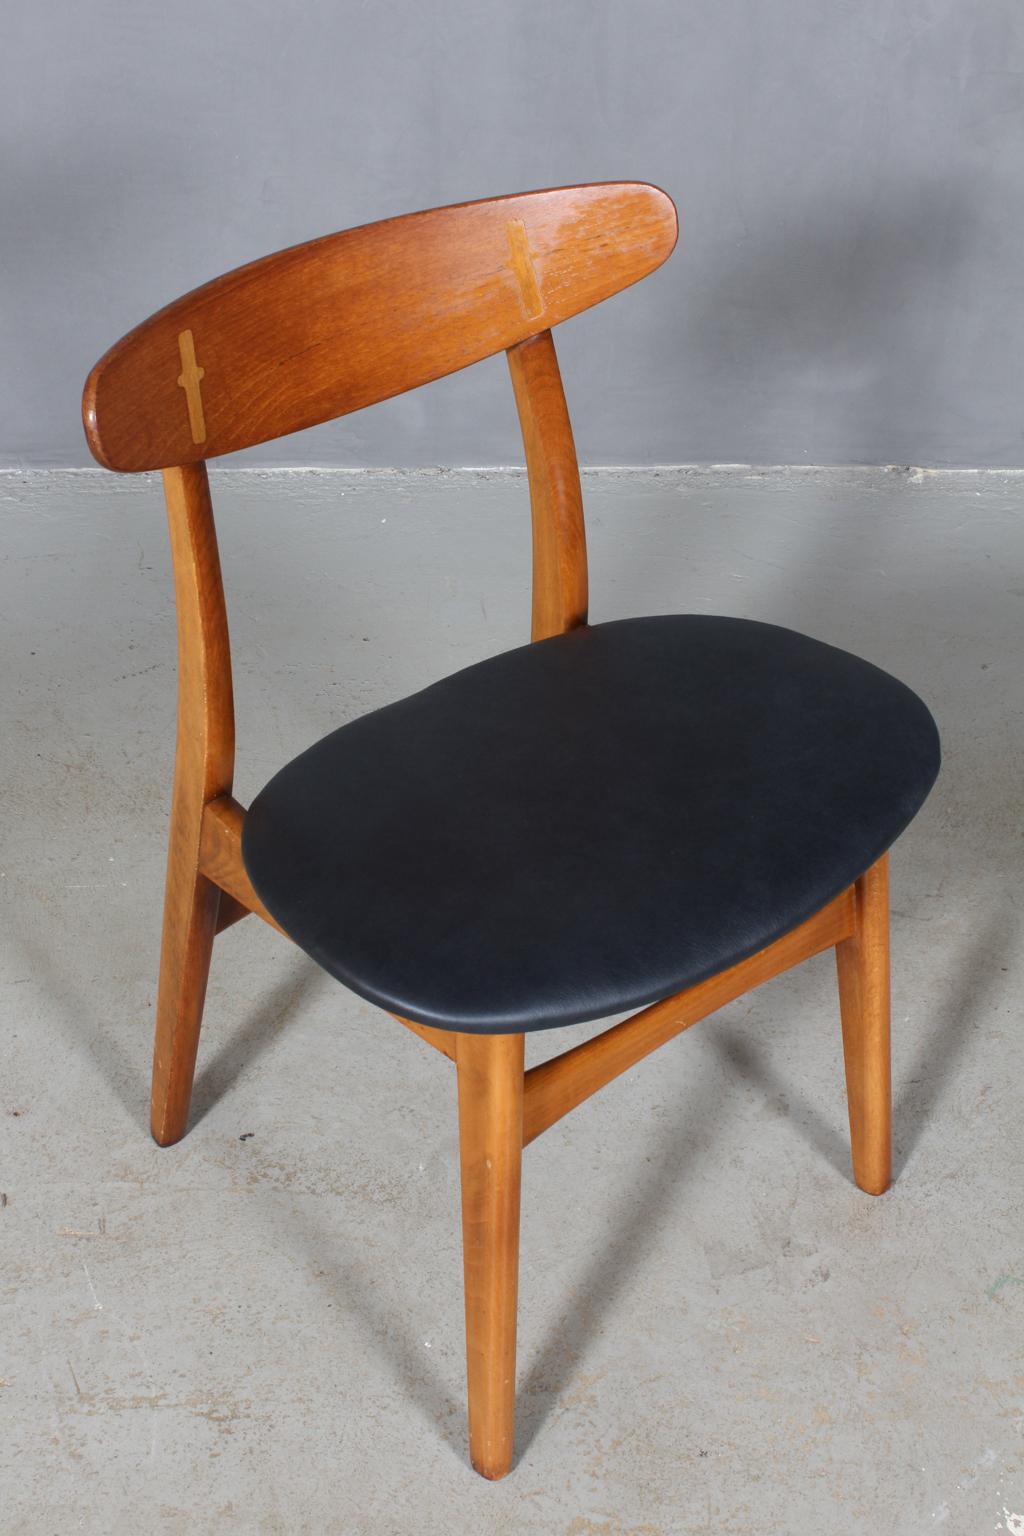 Hans J. Wegner dining chair in beech and teak.

New upholstered with black aniline leather.

The CH-30 was originally designed in 1952 and was one of Wegner’s first chairs. The design has become a Classic with the exposed joint between the